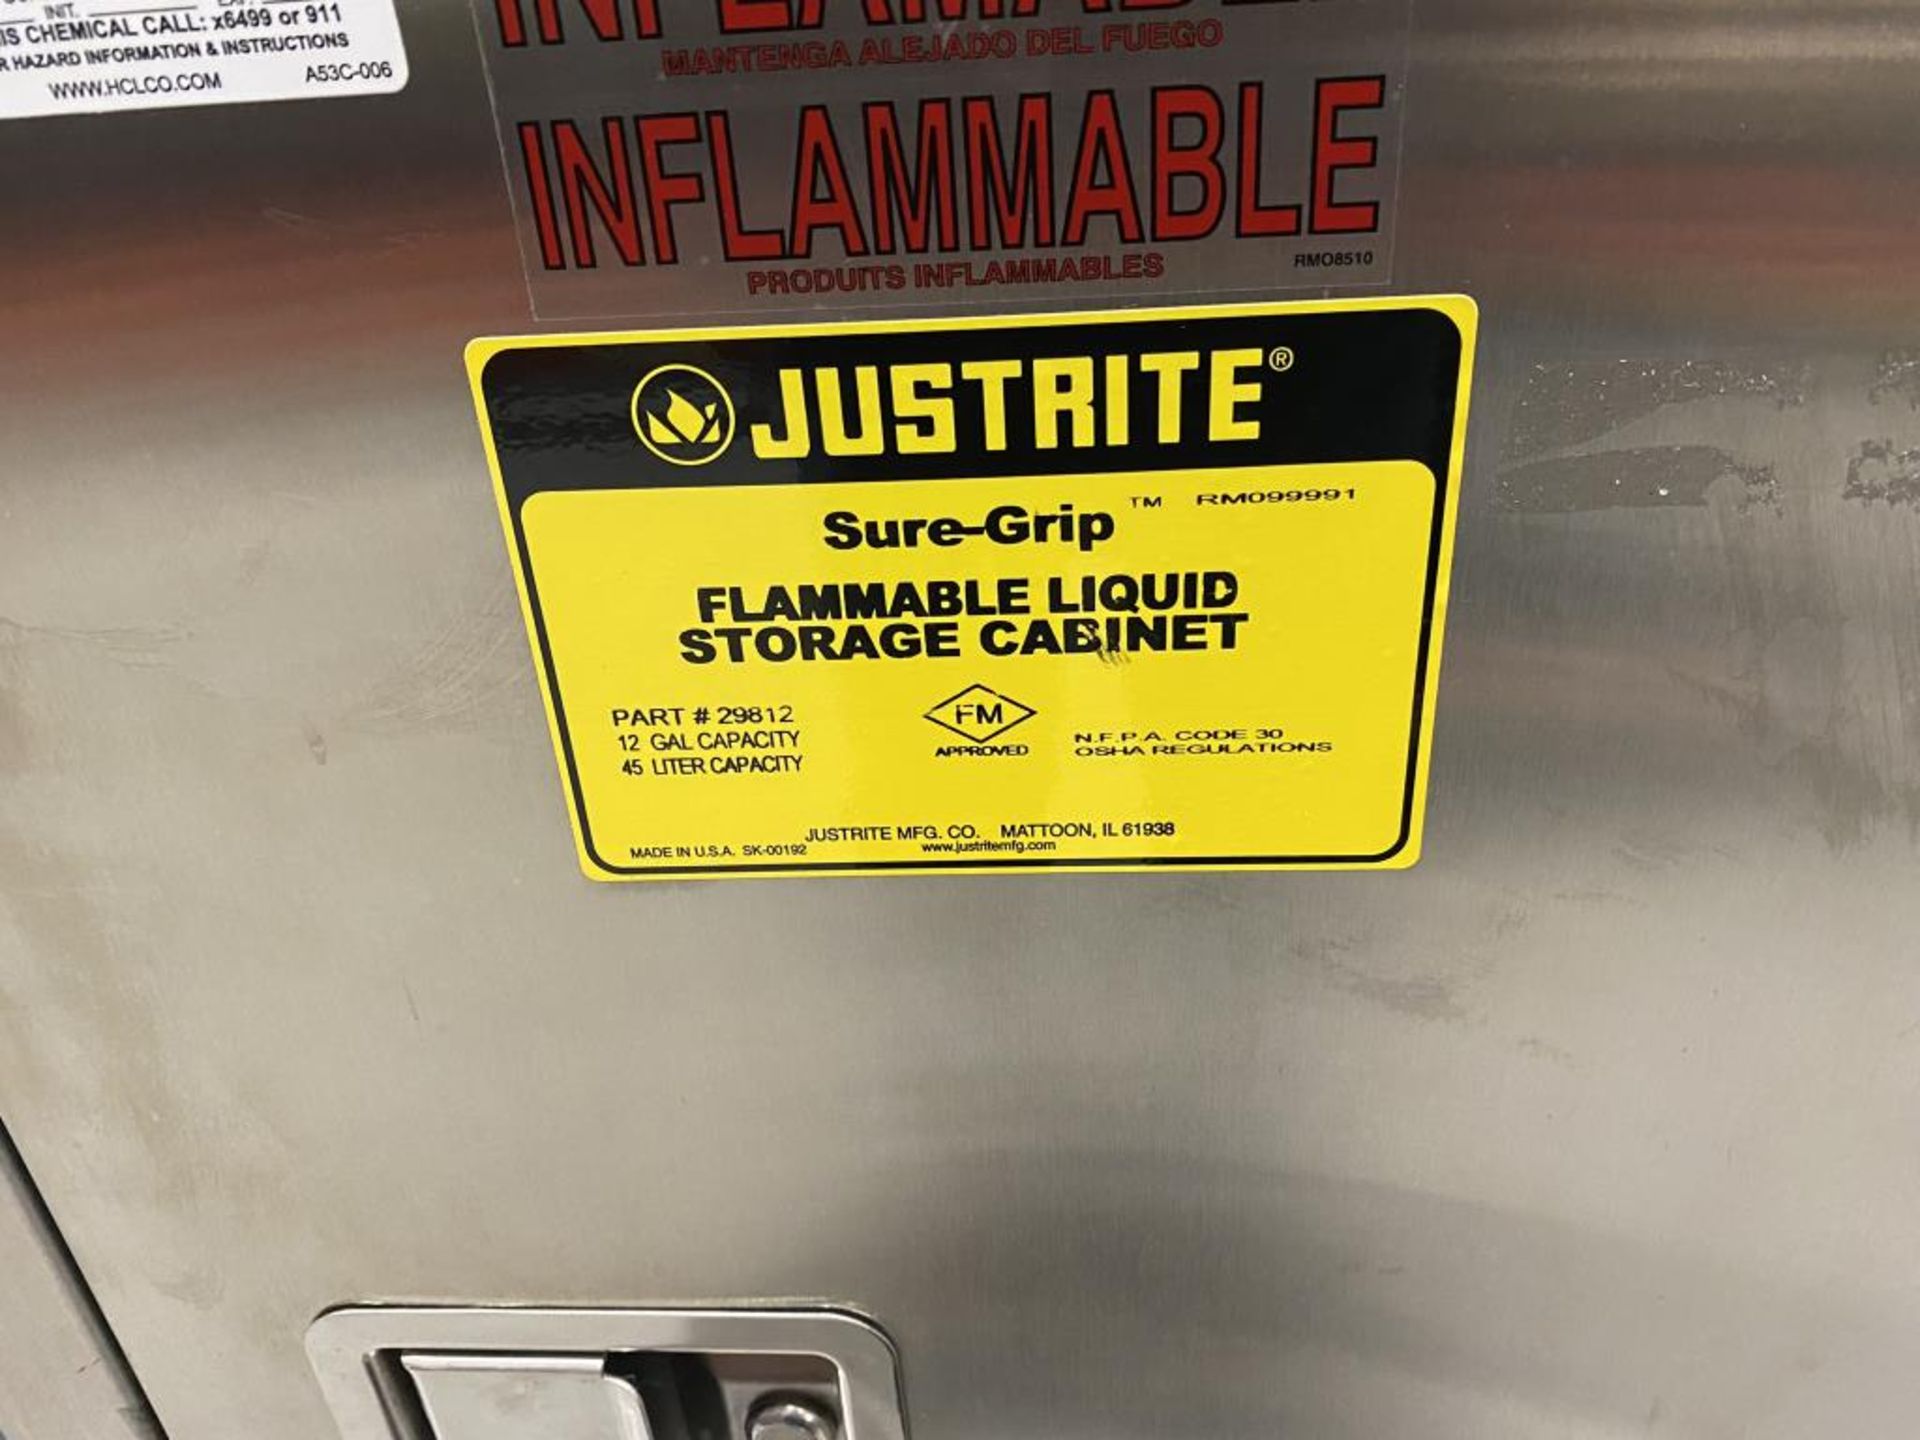 Flammable Liquid Storage Cabinets - Image 3 of 6